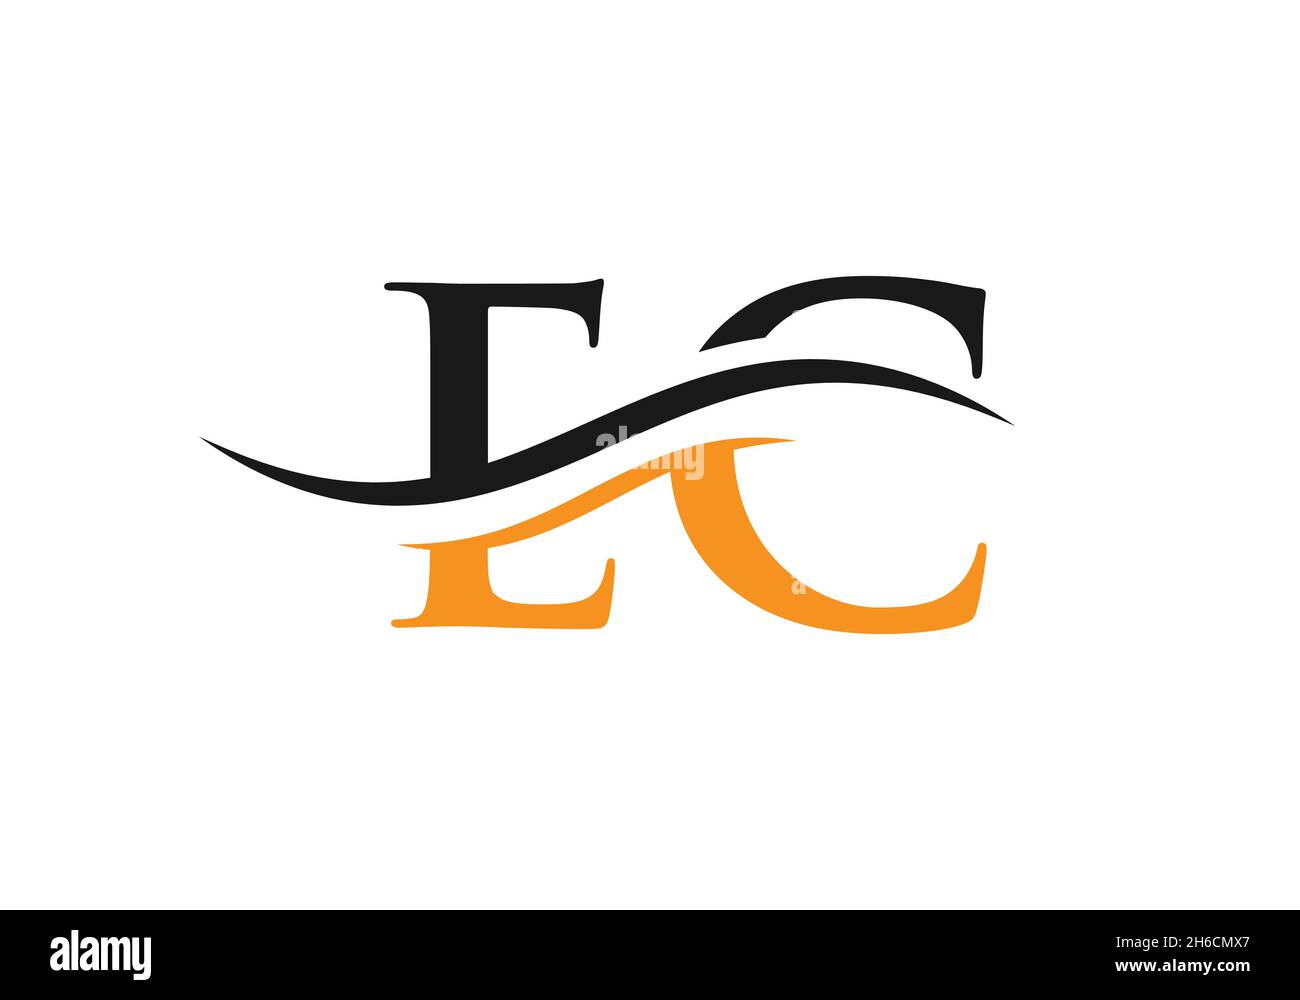 EC Letter Linked Logo for business and company identity. Initial Letter EC Logo Vector Template. Stock Vector